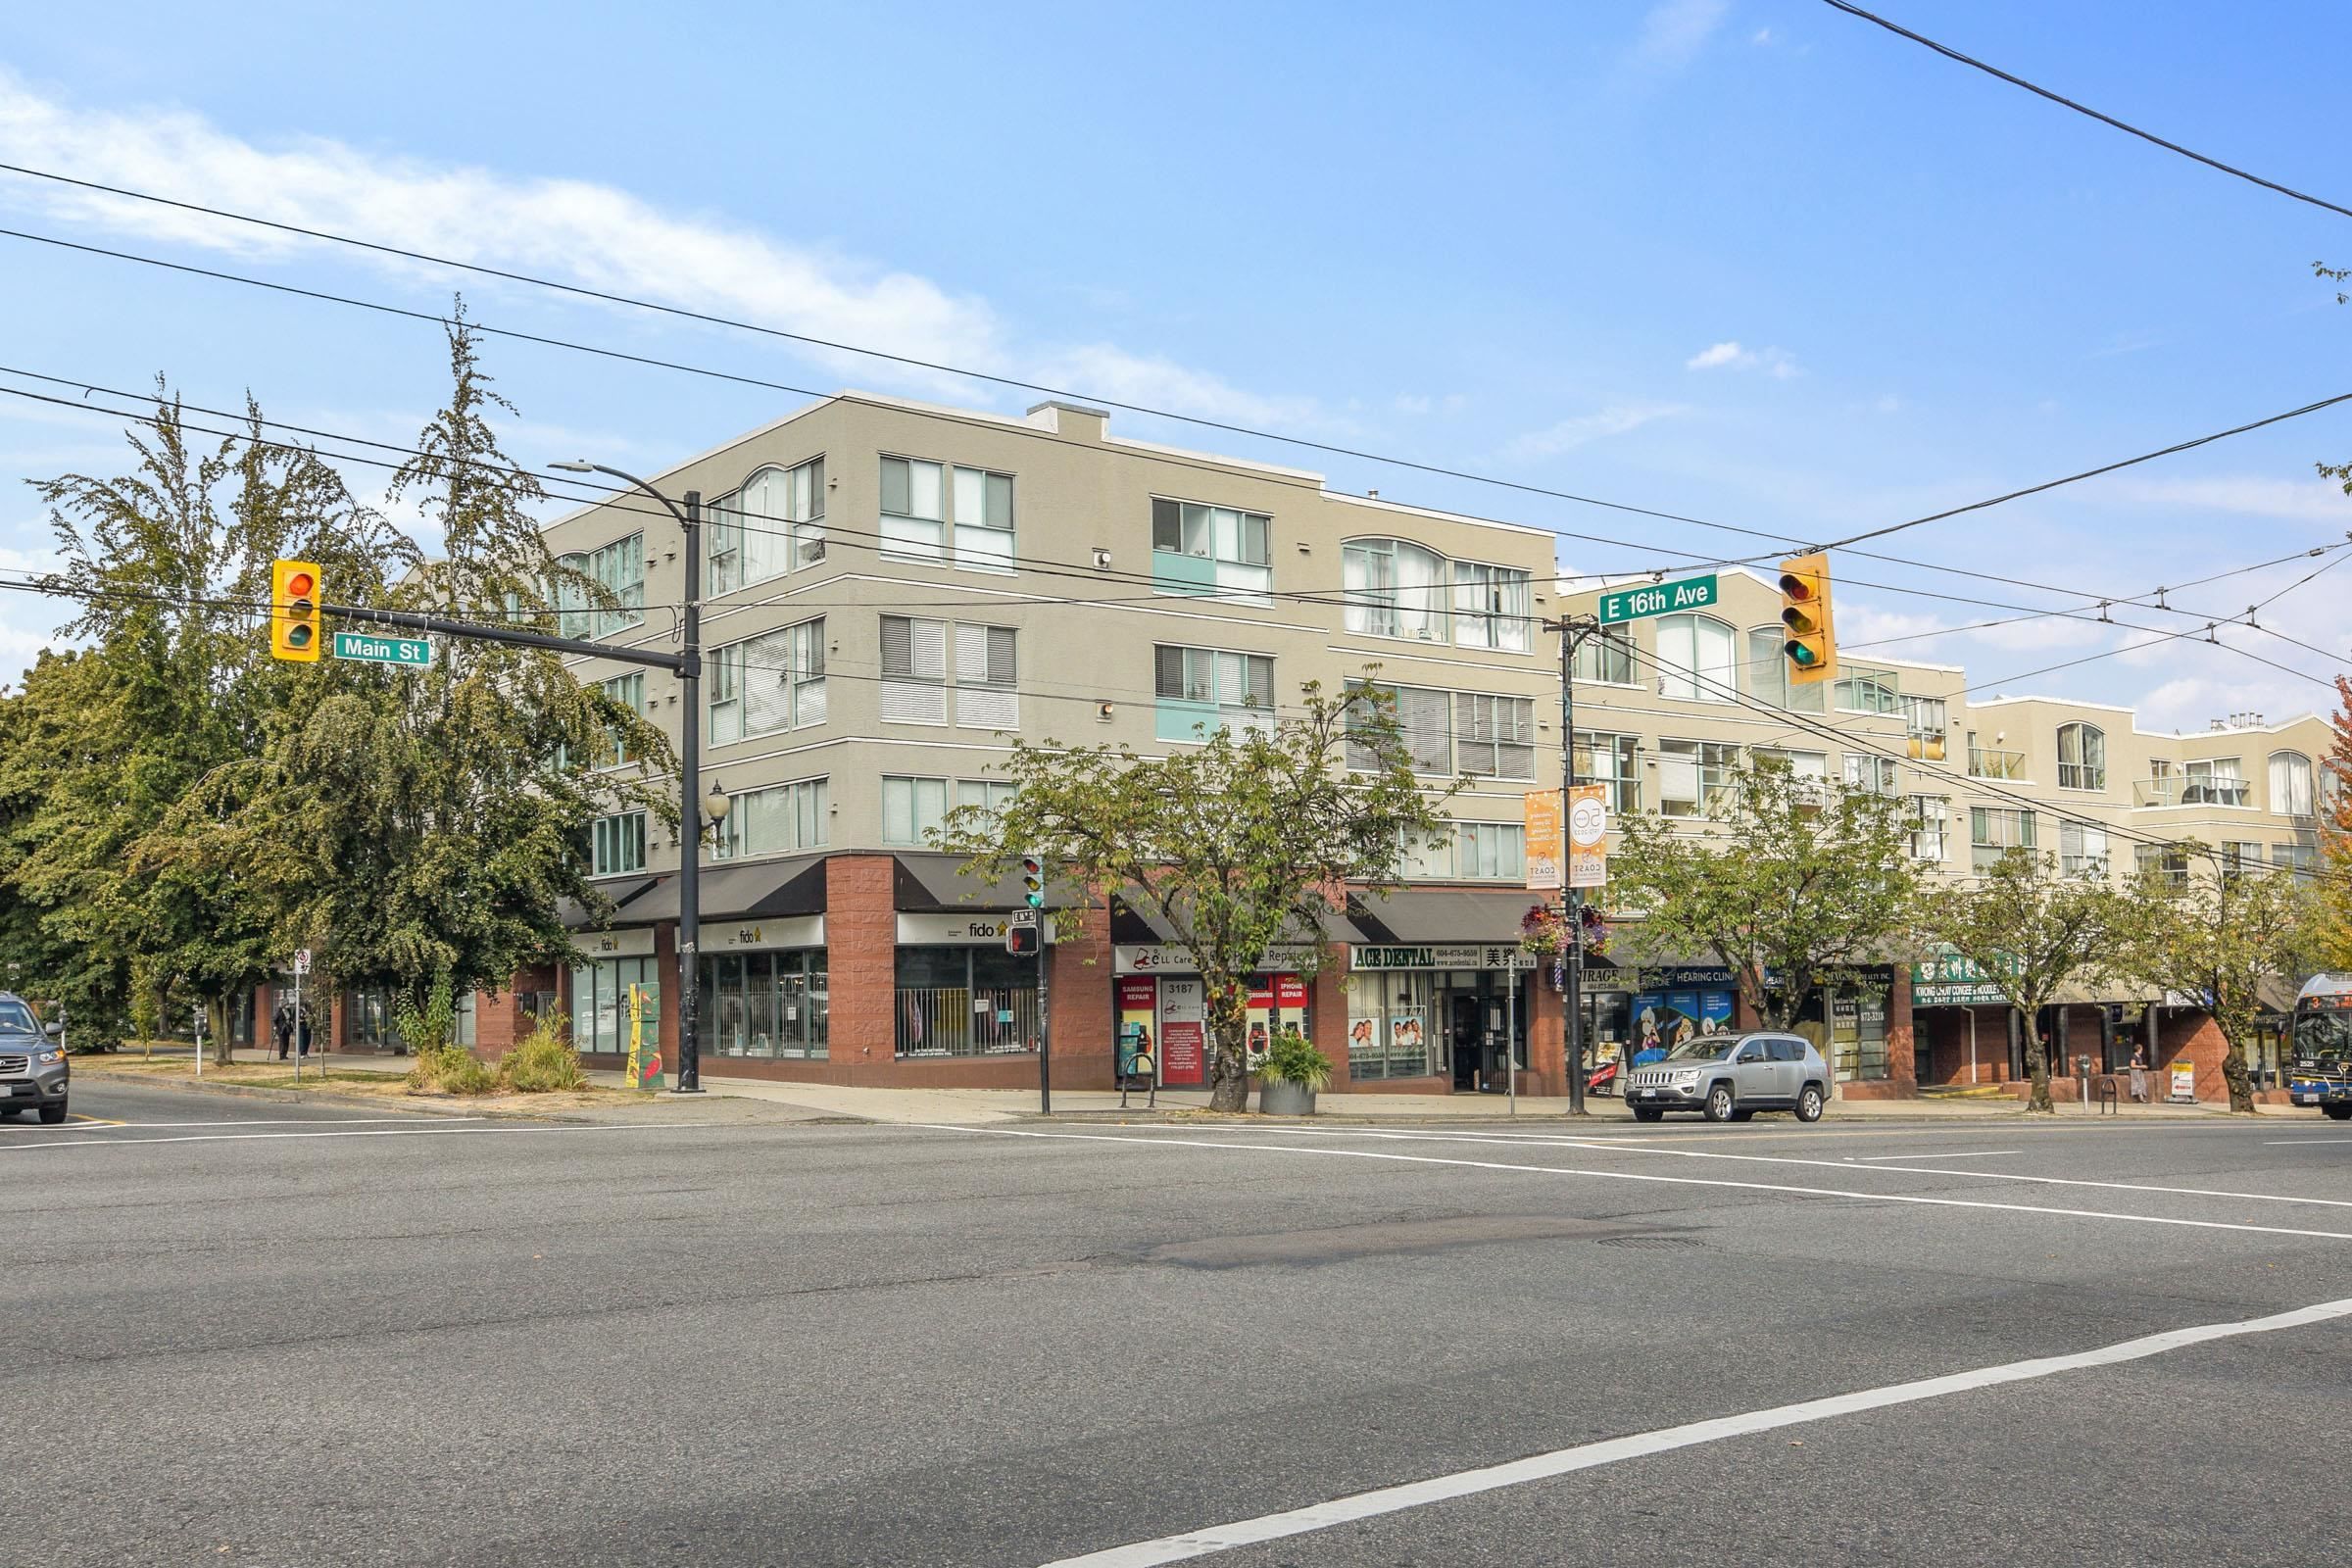 Cartier Place is located on the north-west corner of East 16th Avenue and Main Street!